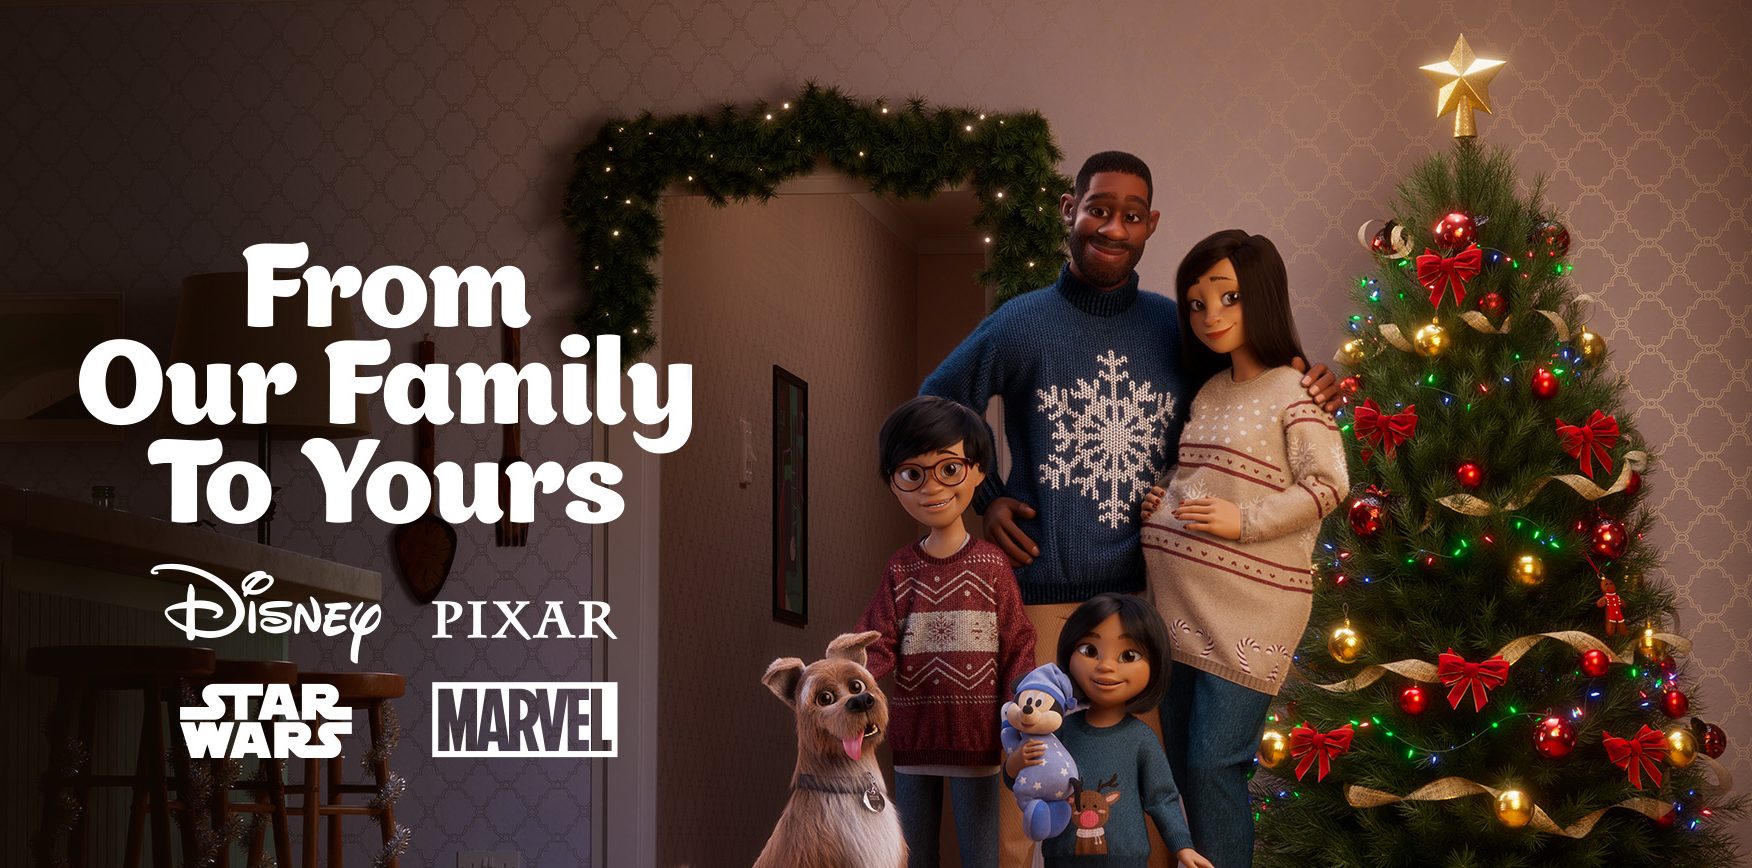 Disney launches magical final instalment of ‘From Our Family To Yours’ Christmas advert trilogy in support of Make-A-Wish® 